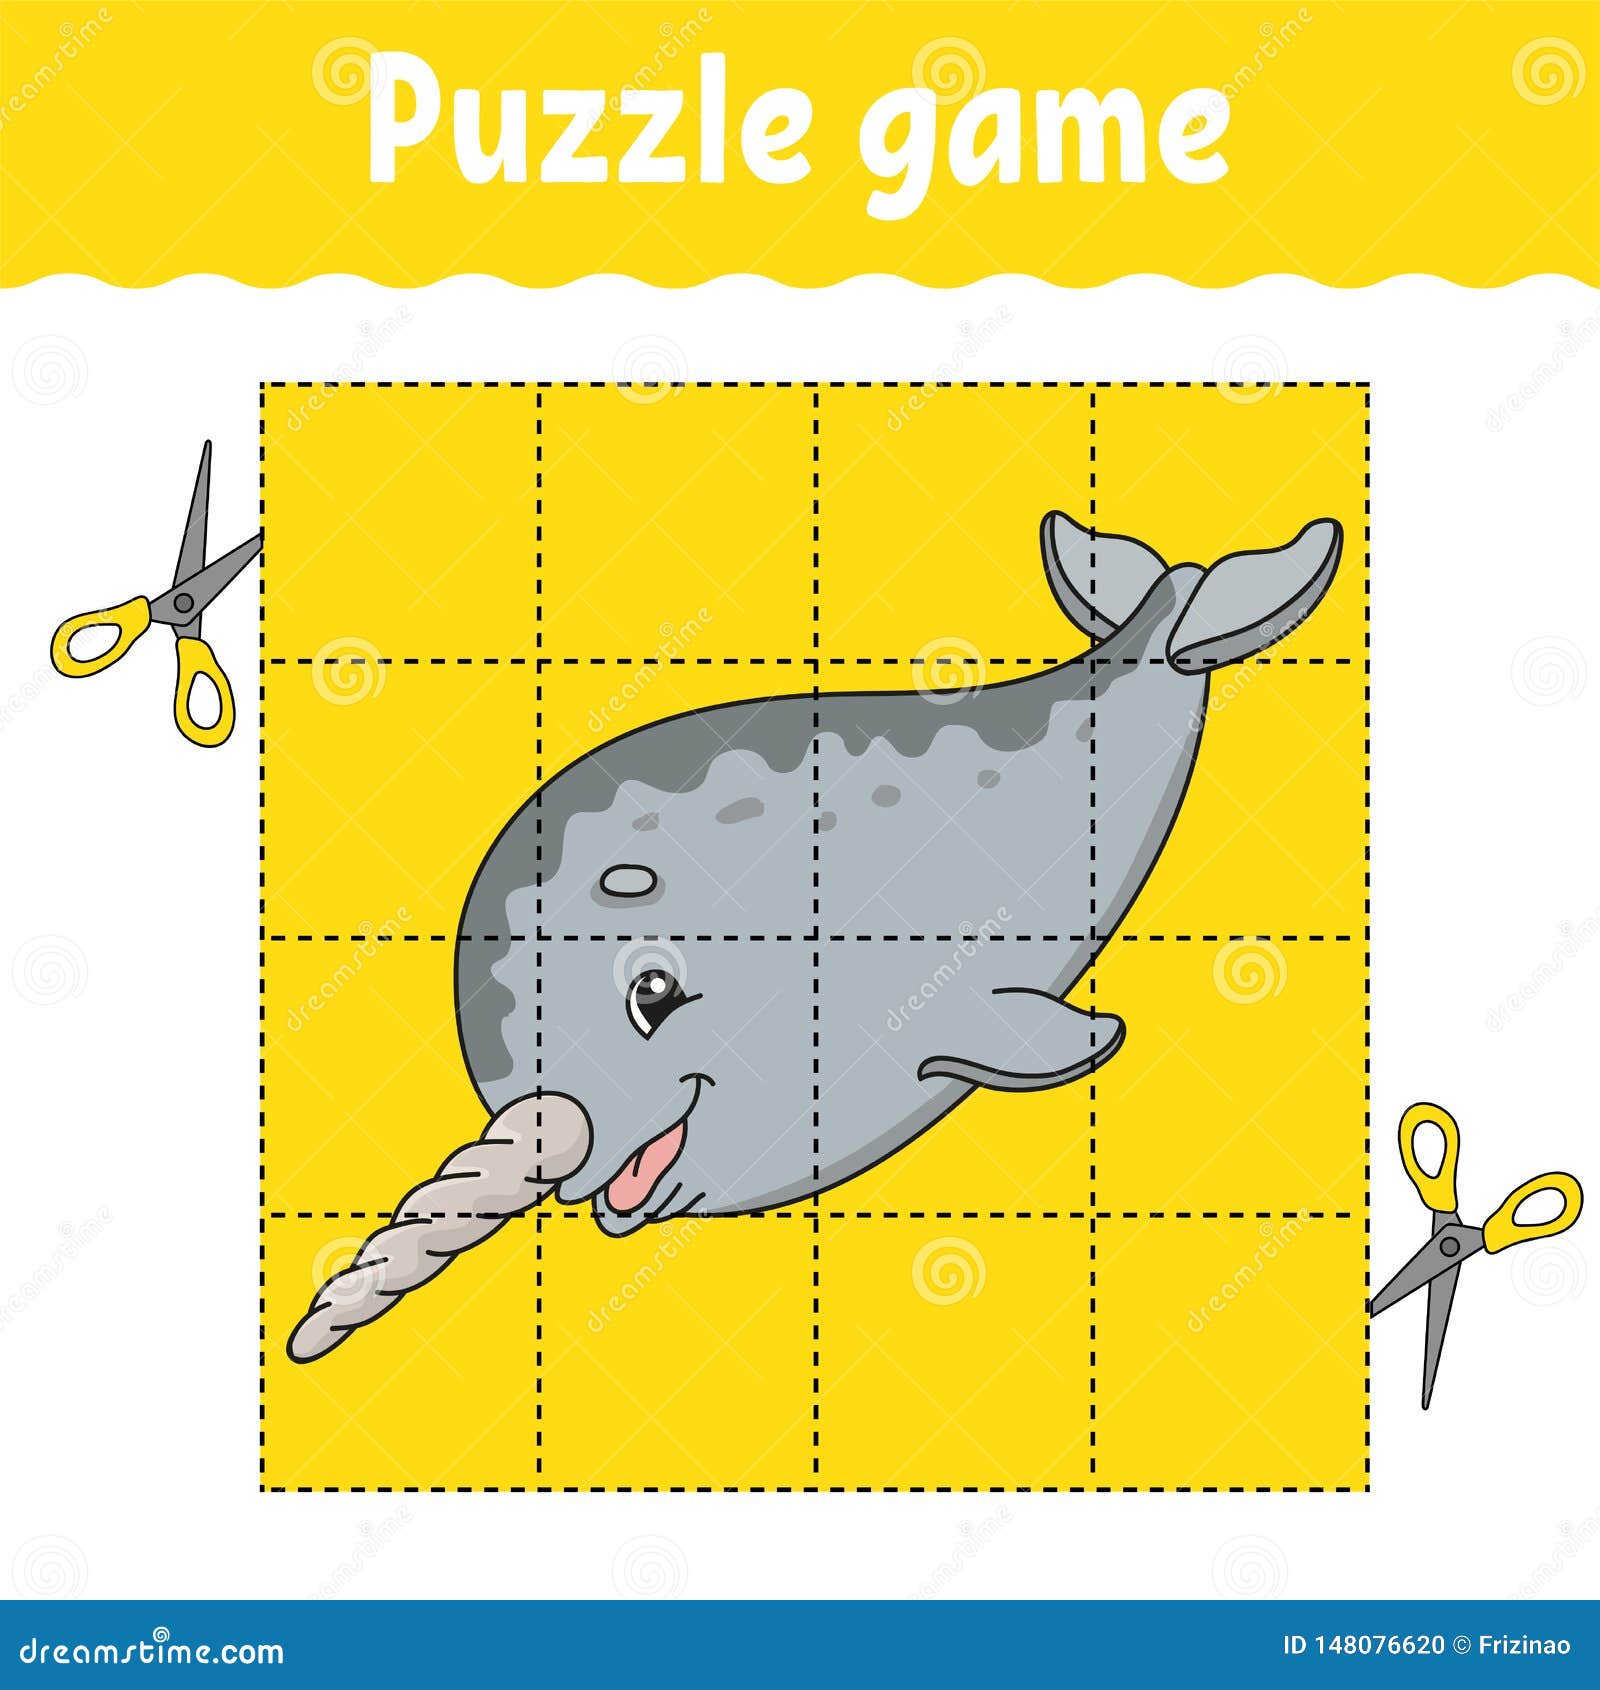 puzzle-game-for-kids-education-developing-worksheet-learning-game